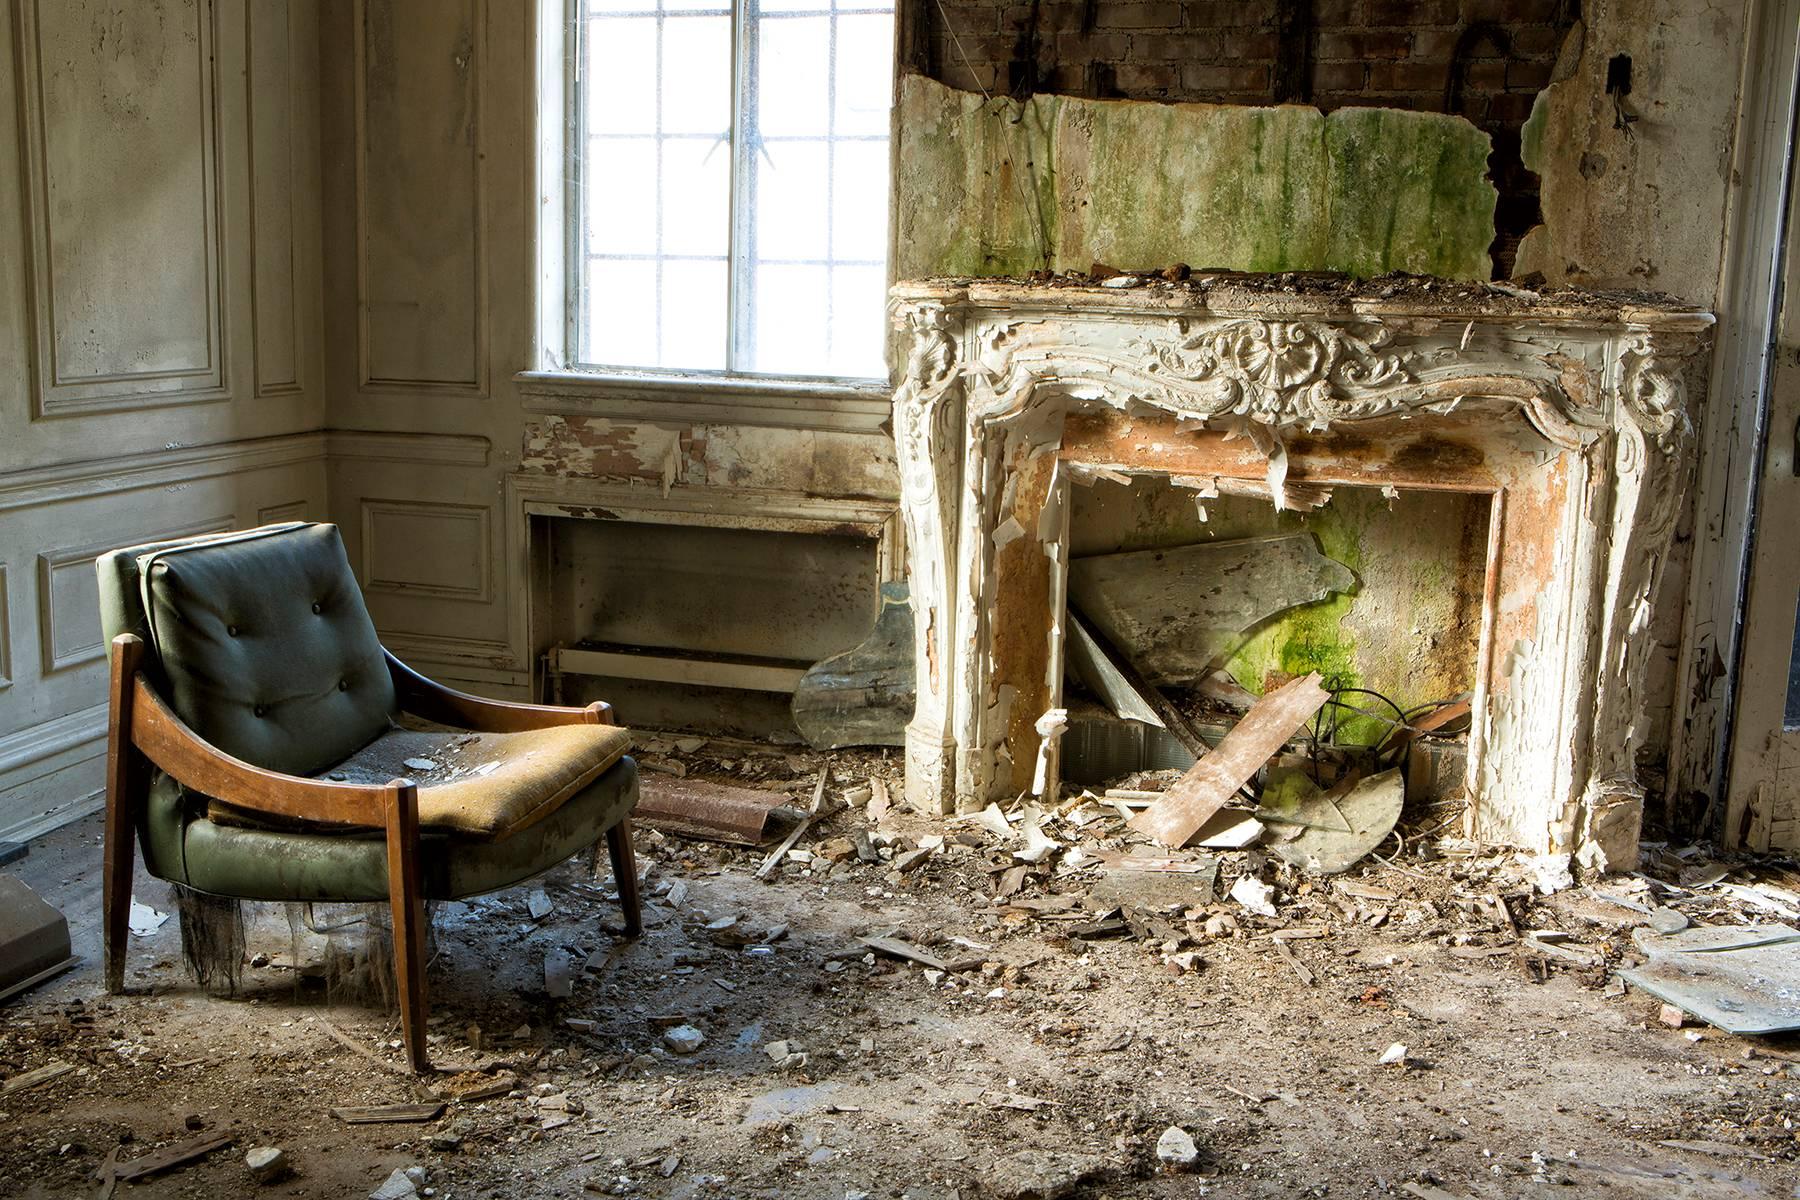 "Weary", contemporary, abandoned, fireplace, chair, color photograph